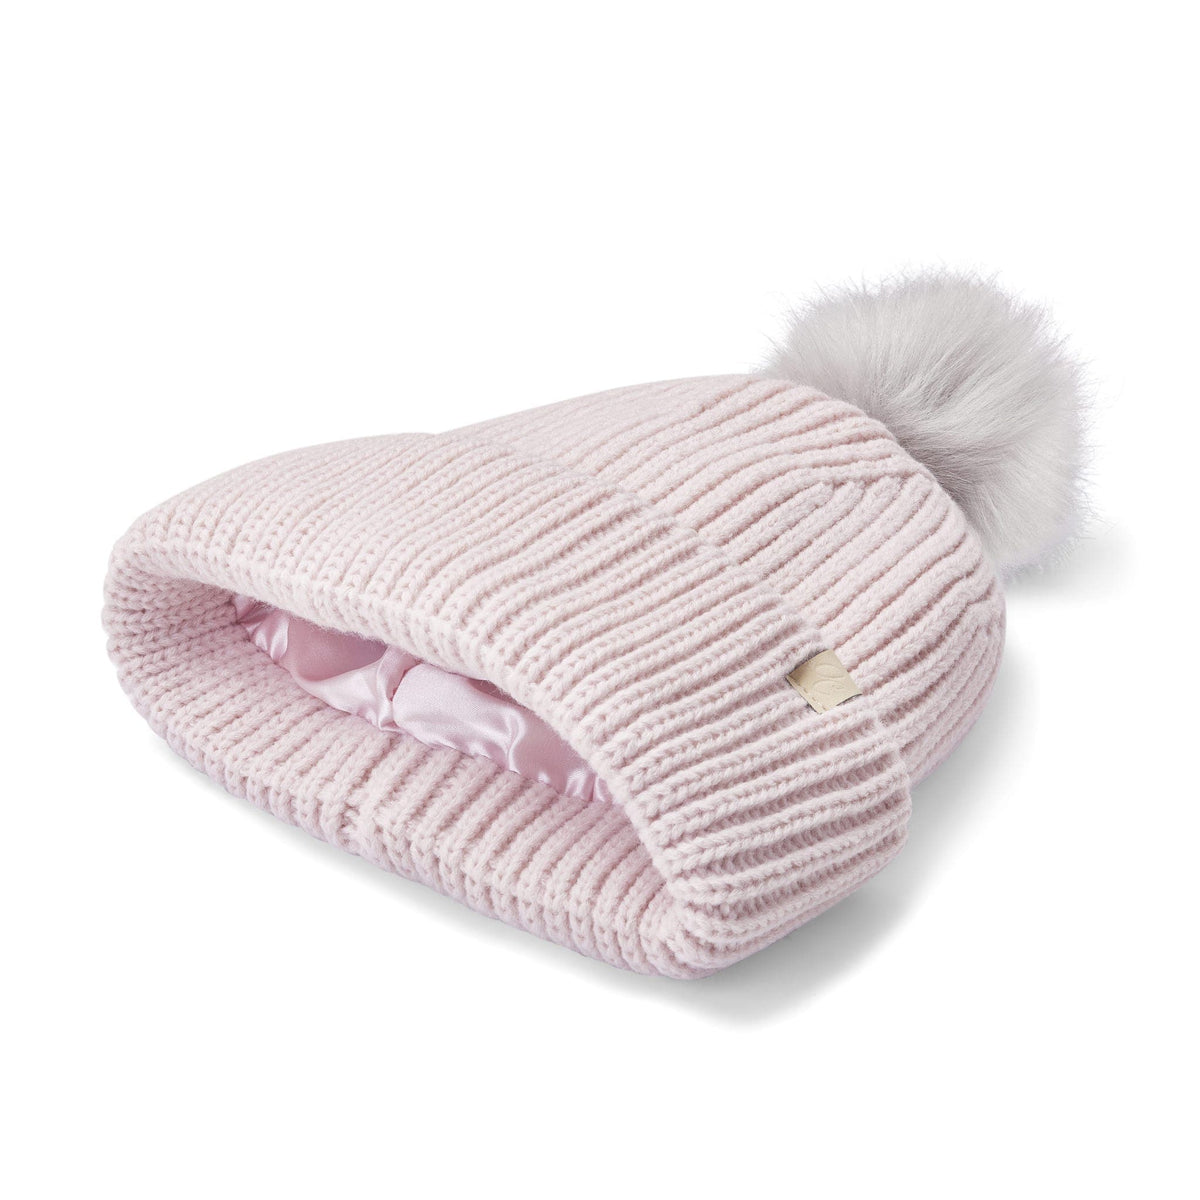 Only Curls Chunky Satin Lined Beanie - Dusty Pink with Pom Pom - Only Curls